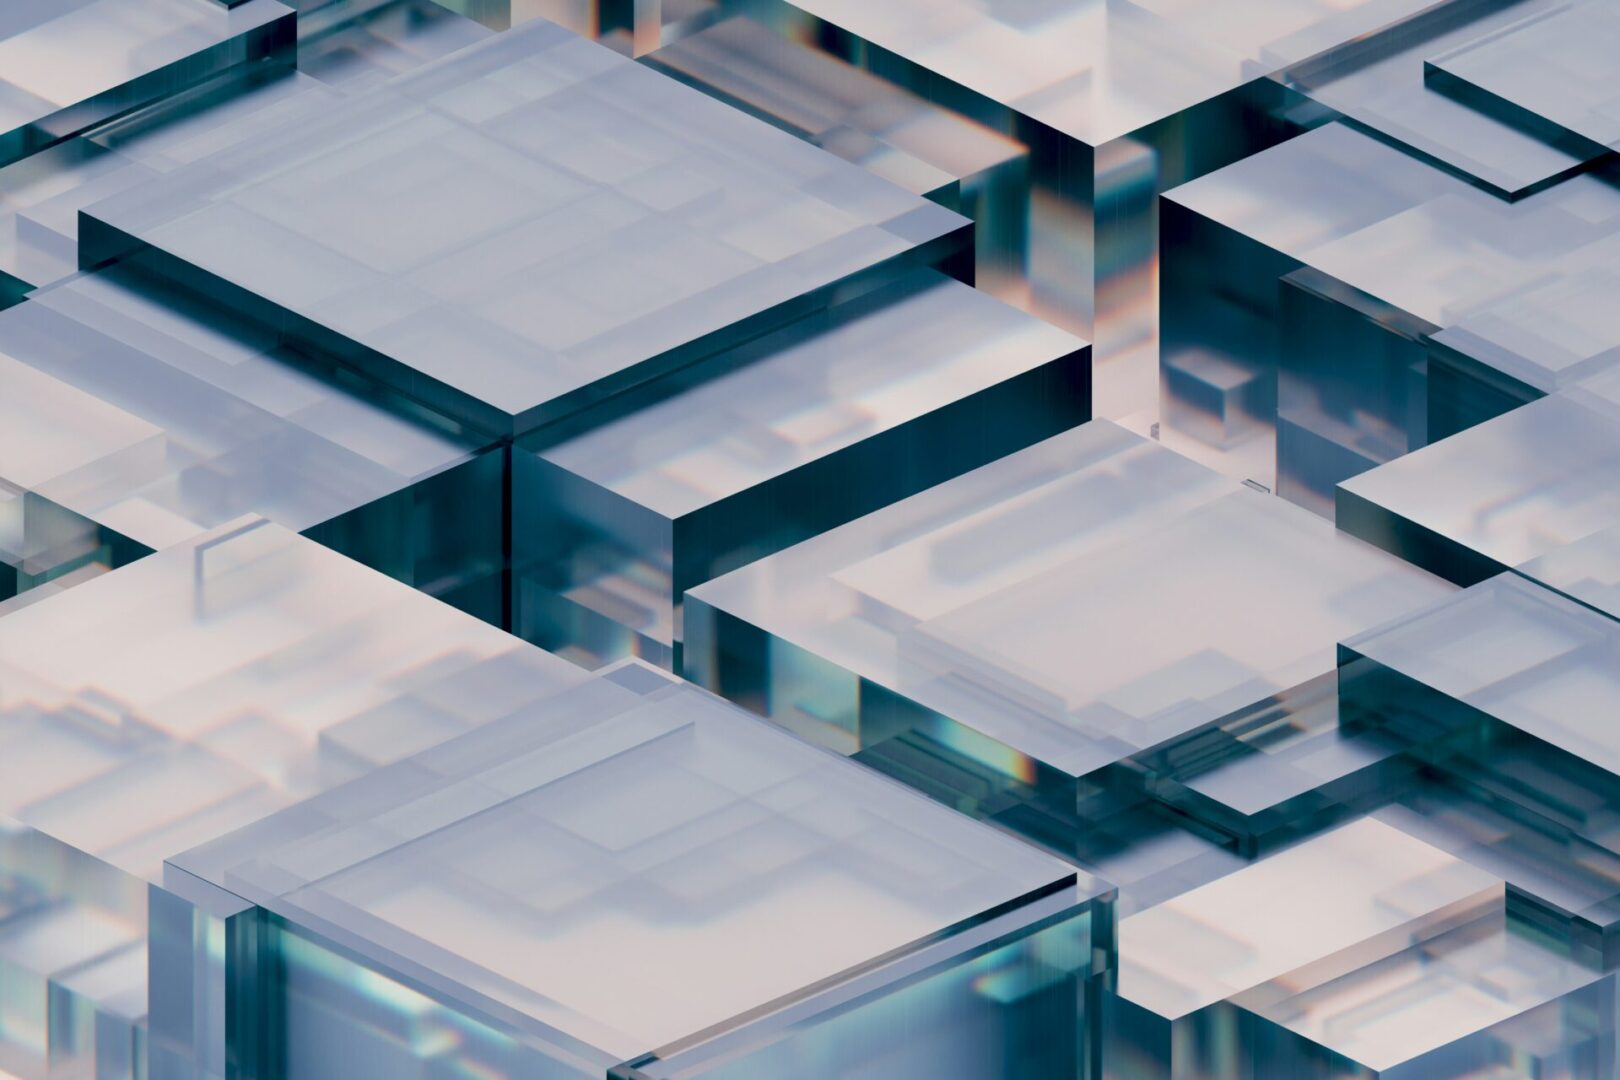 A close up of some glass blocks